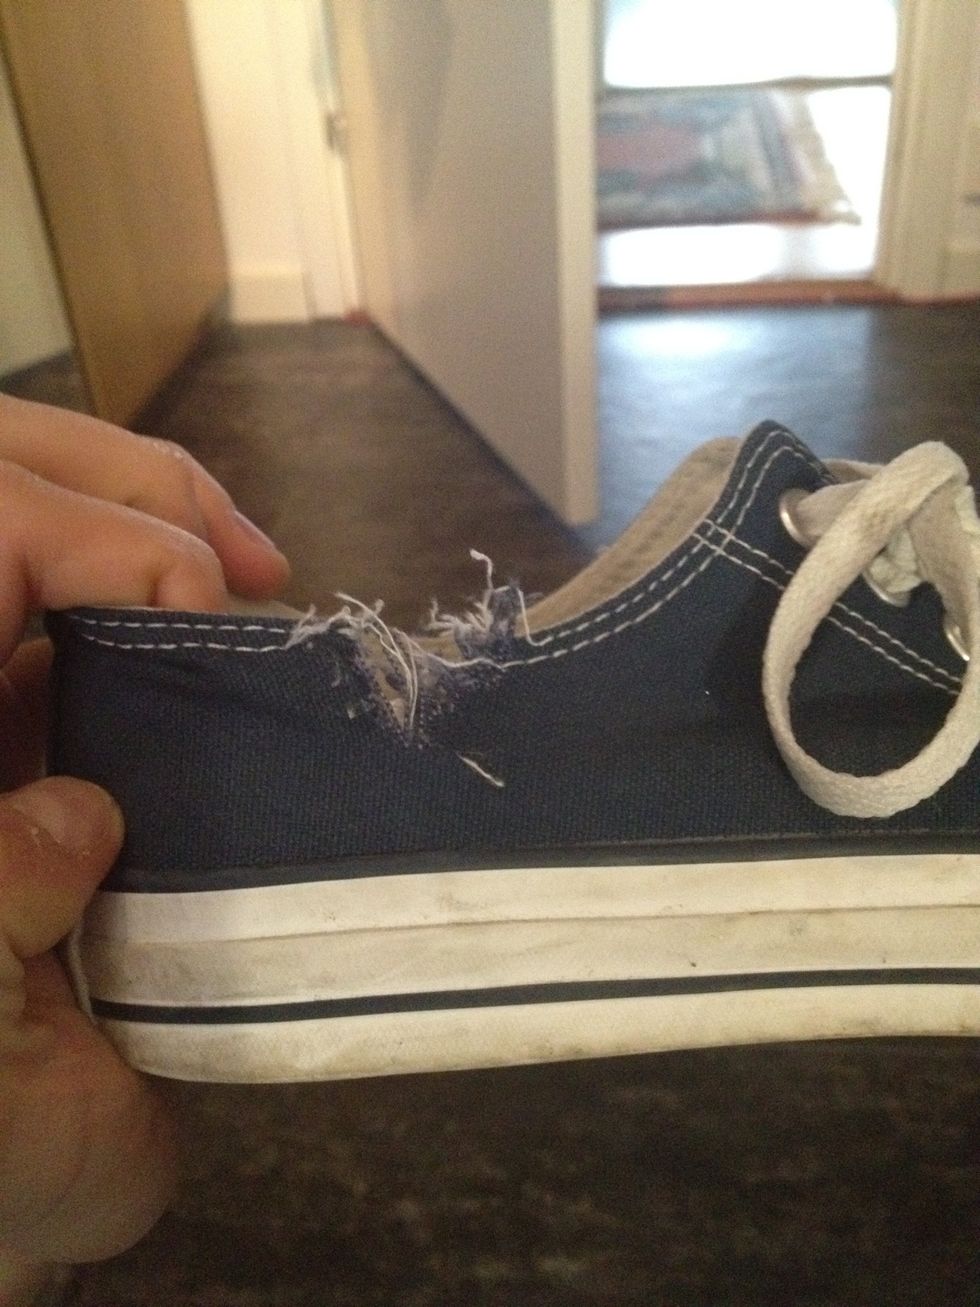 How to fix ripped converse shoes - B+C Guides